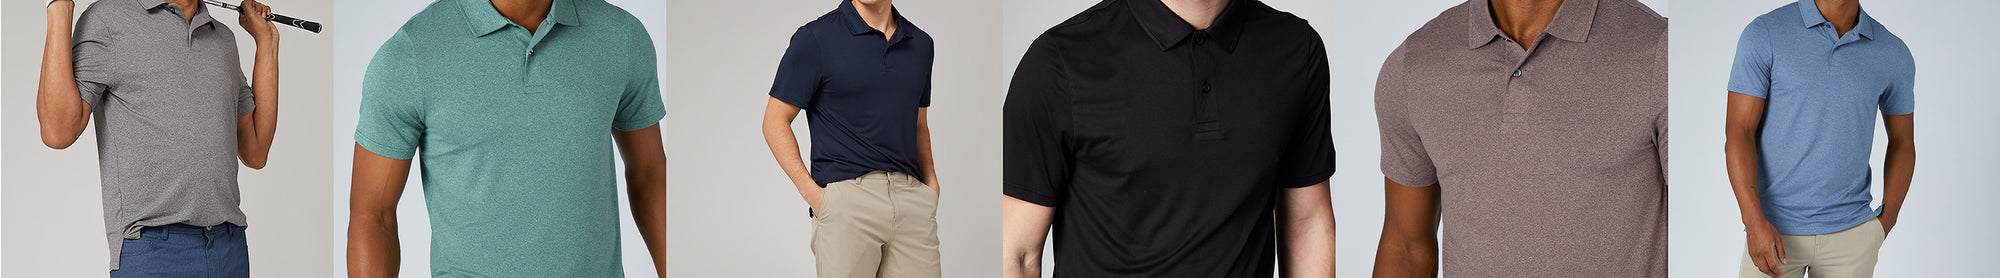 3 For $24 Polos